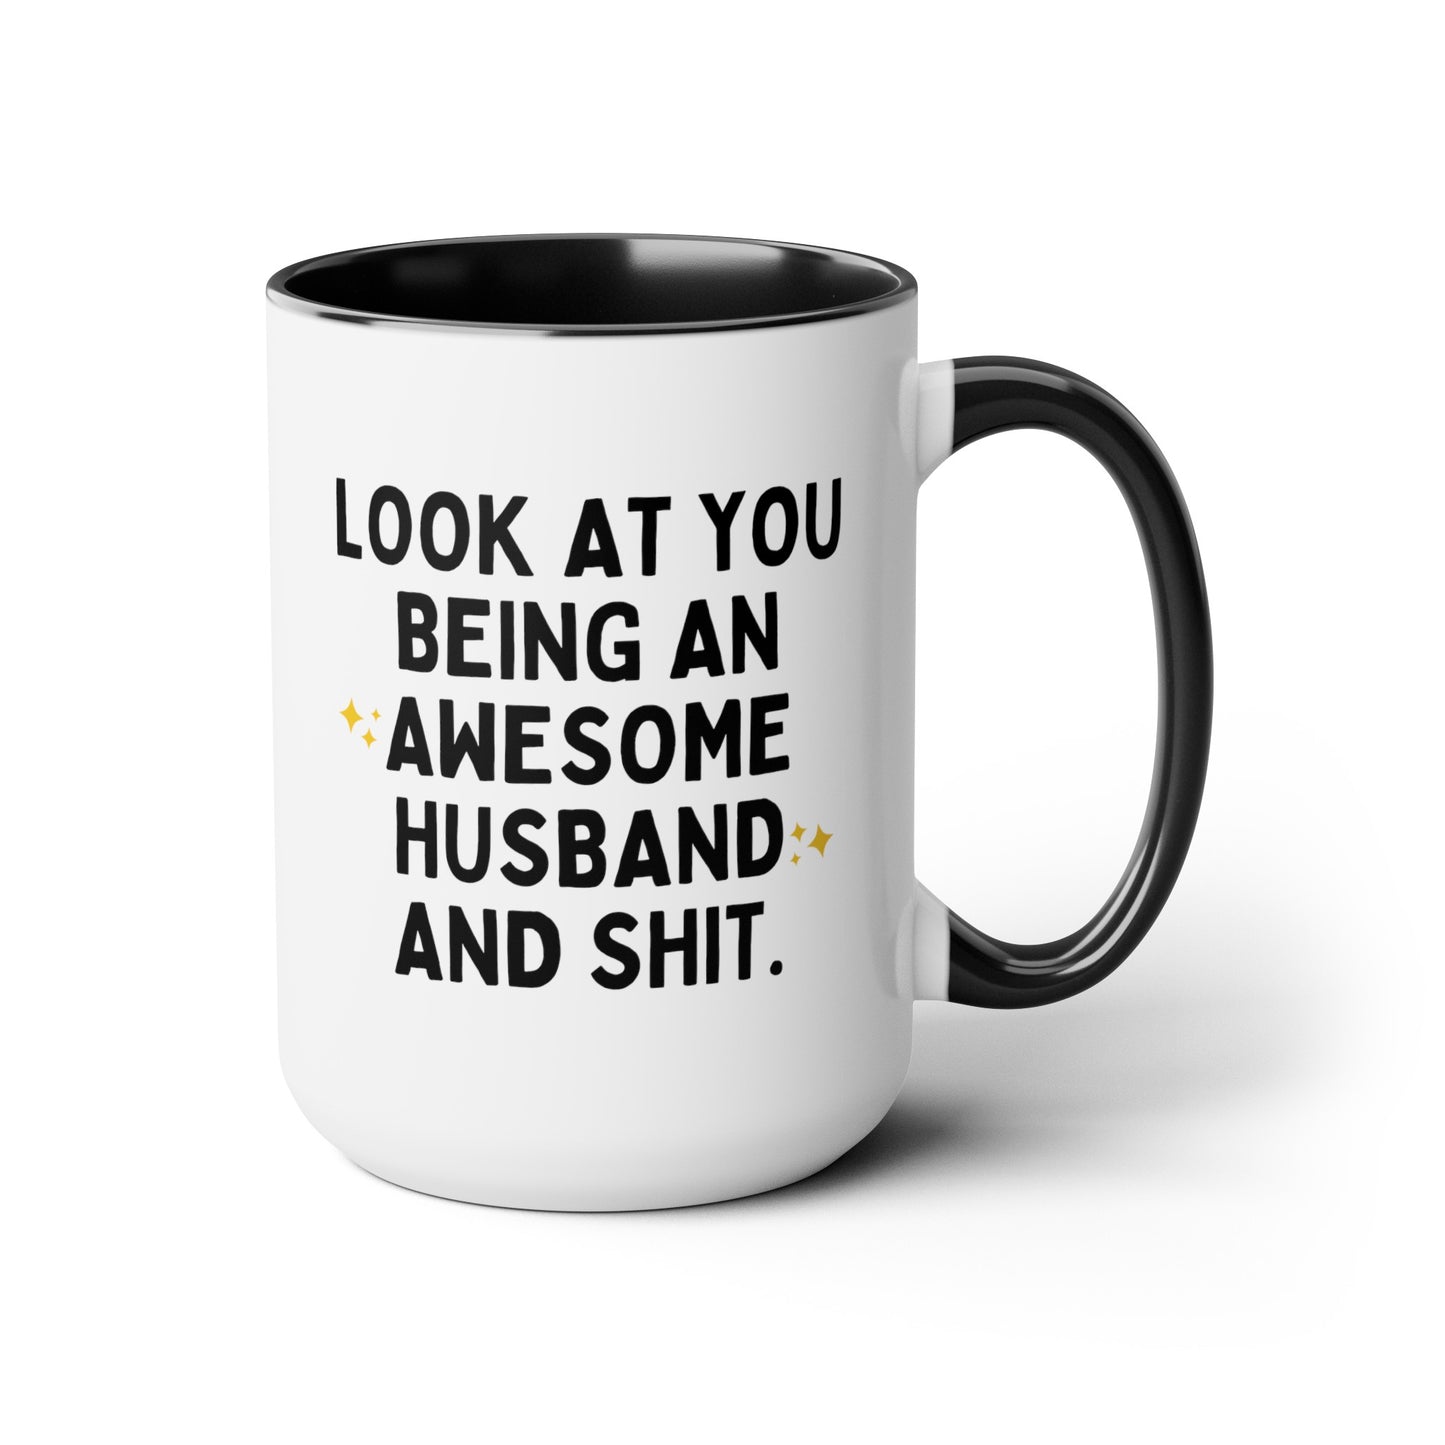 Look At You Being An Awesome Husband And Shit 15oz white with black accent funny large coffee mug gift for hubby curse joke gag idea waveywares wavey wares wavywares wavy wares